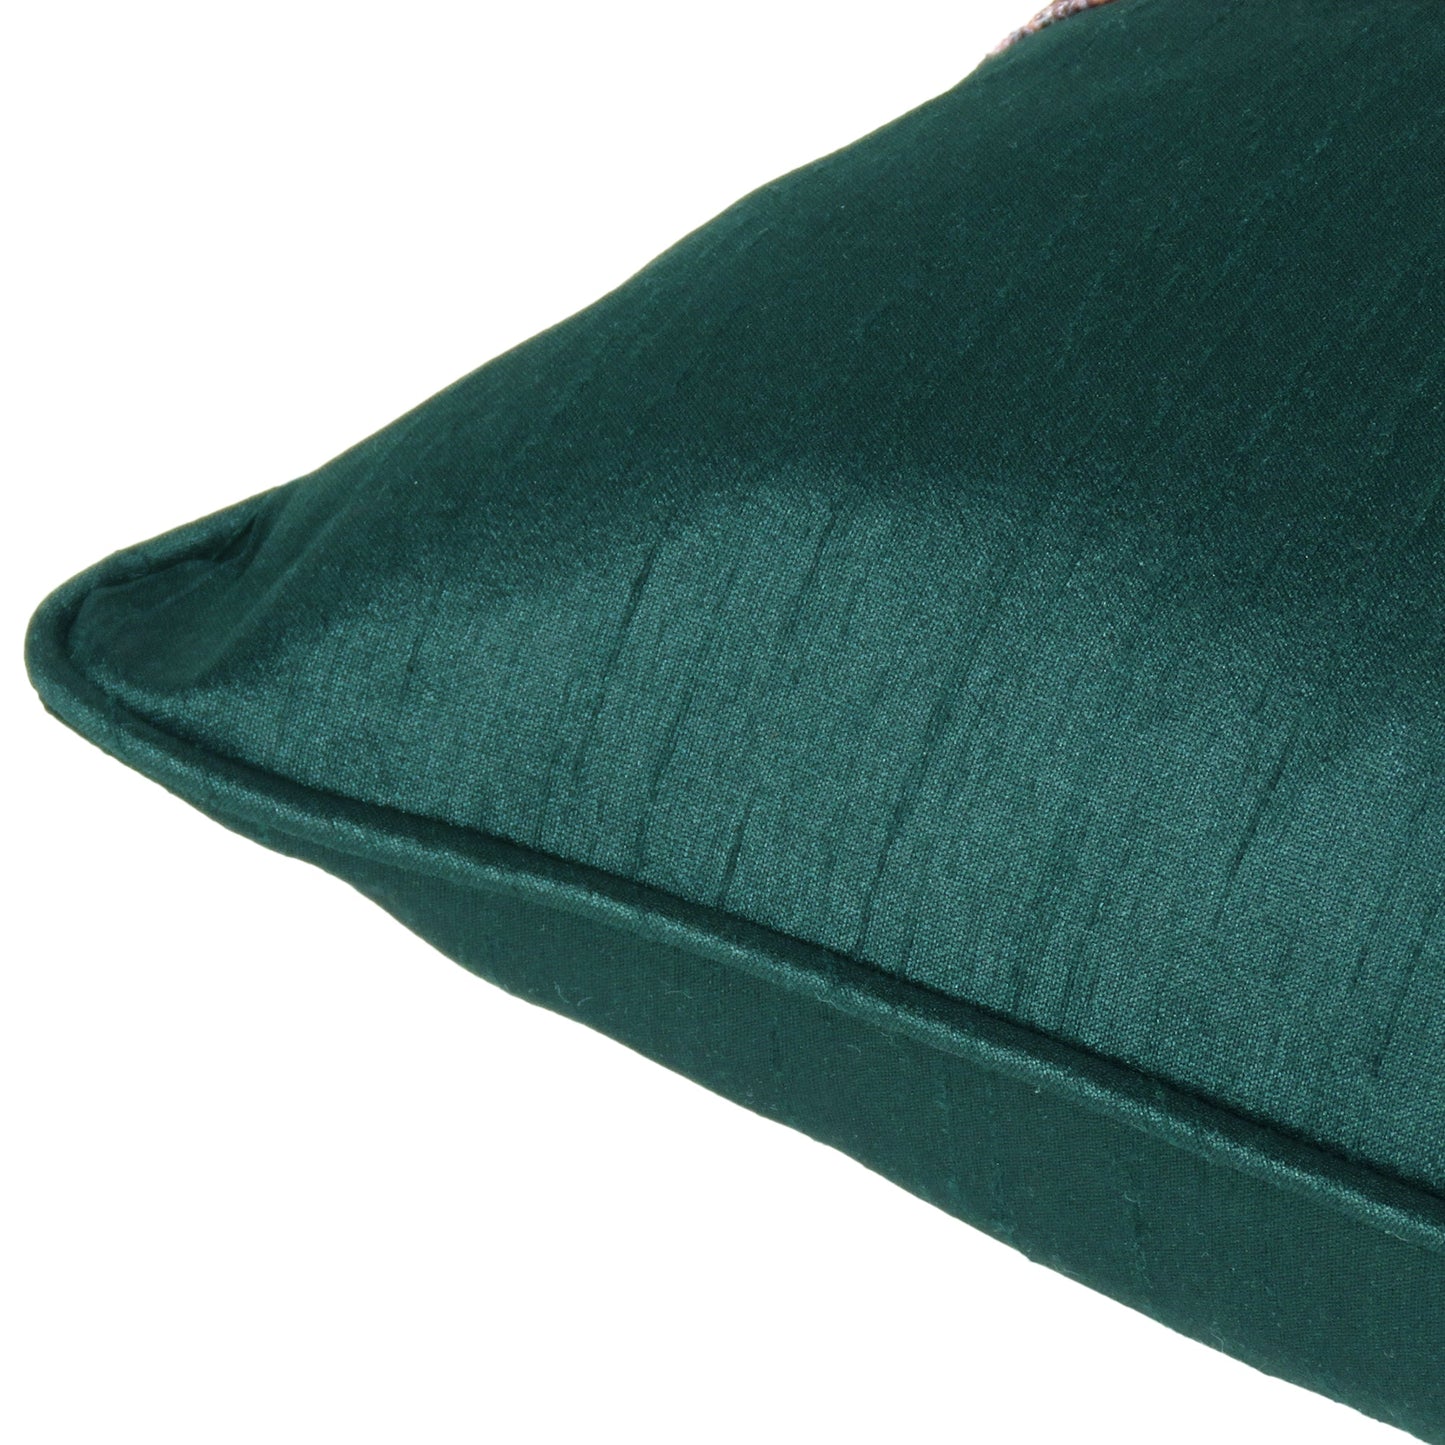 Velvet Polydupion Decorative Printed Cushion Cases in Set of 2 - Green